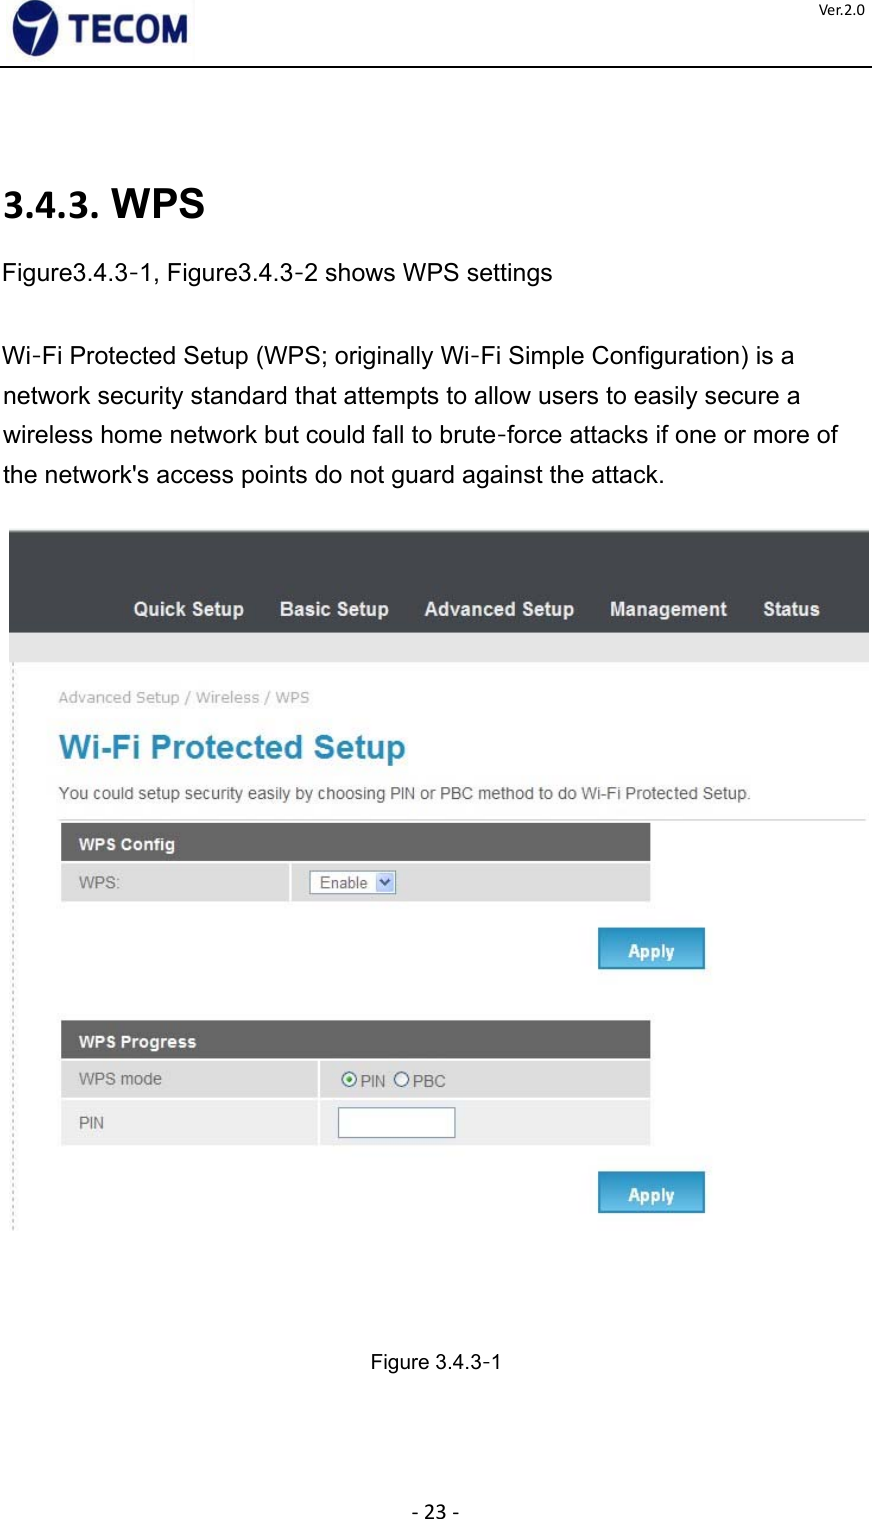  ‐23‐Ver.2.0    3.4.3. WPS  Figure3.4.3‐1, Figure3.4.3‐2 shows WPS settings    Wi‐Fi Protected Setup (WPS; originally Wi‐Fi Simple Configuration) is a network security standard that attempts to allow users to easily secure a wireless home network but could fall to brute‐force attacks if one or more of the network&apos;s access points do not guard against the attack.            Figure 3.4.3‐1    